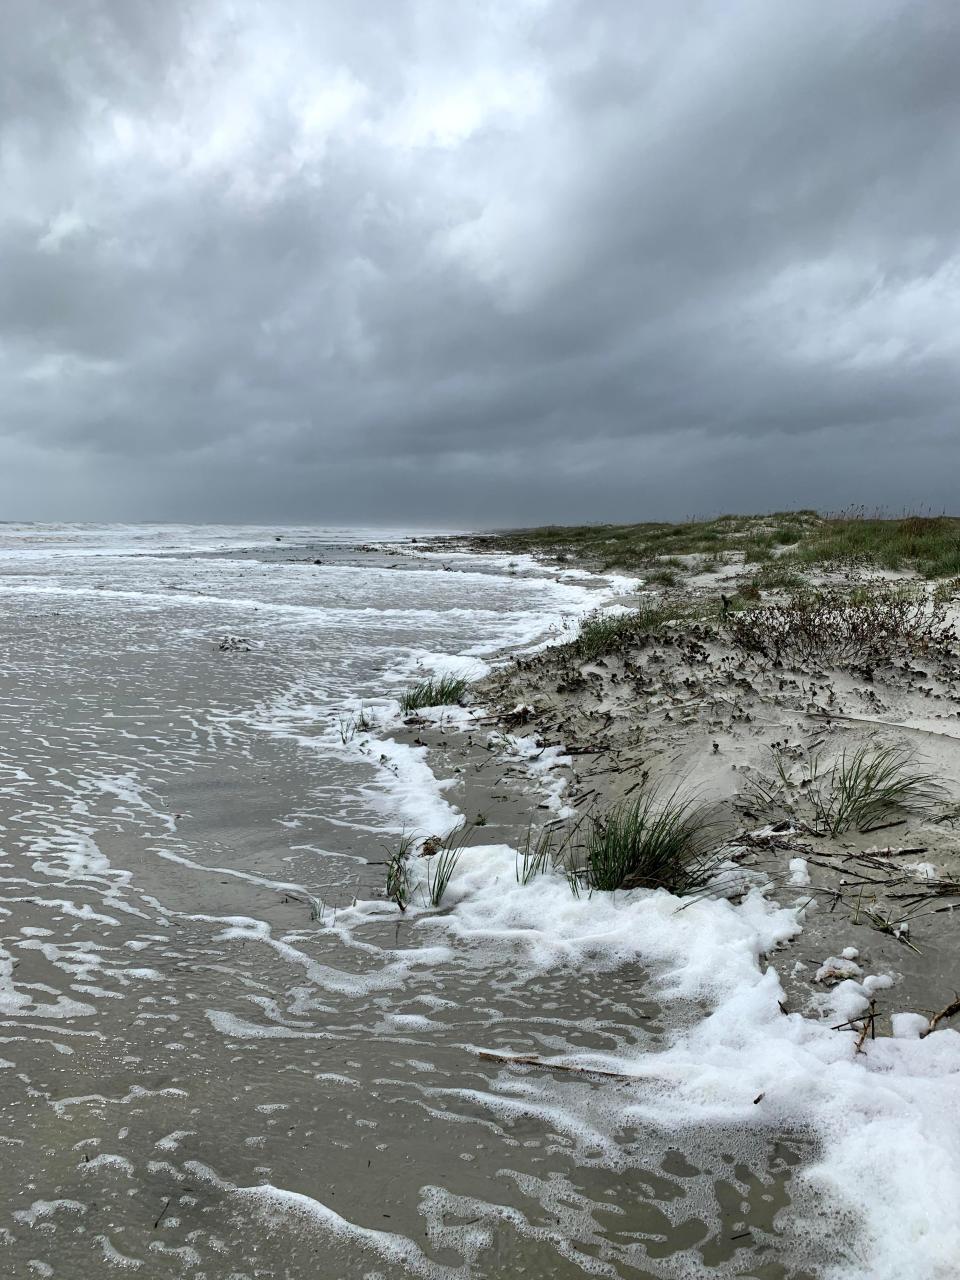 Cumberland Island draws tourists from all over to the South to the Georgia coast to enjoy its beauty, but with increased demand the National Park Service is looking to make changes to accommodate the growth.